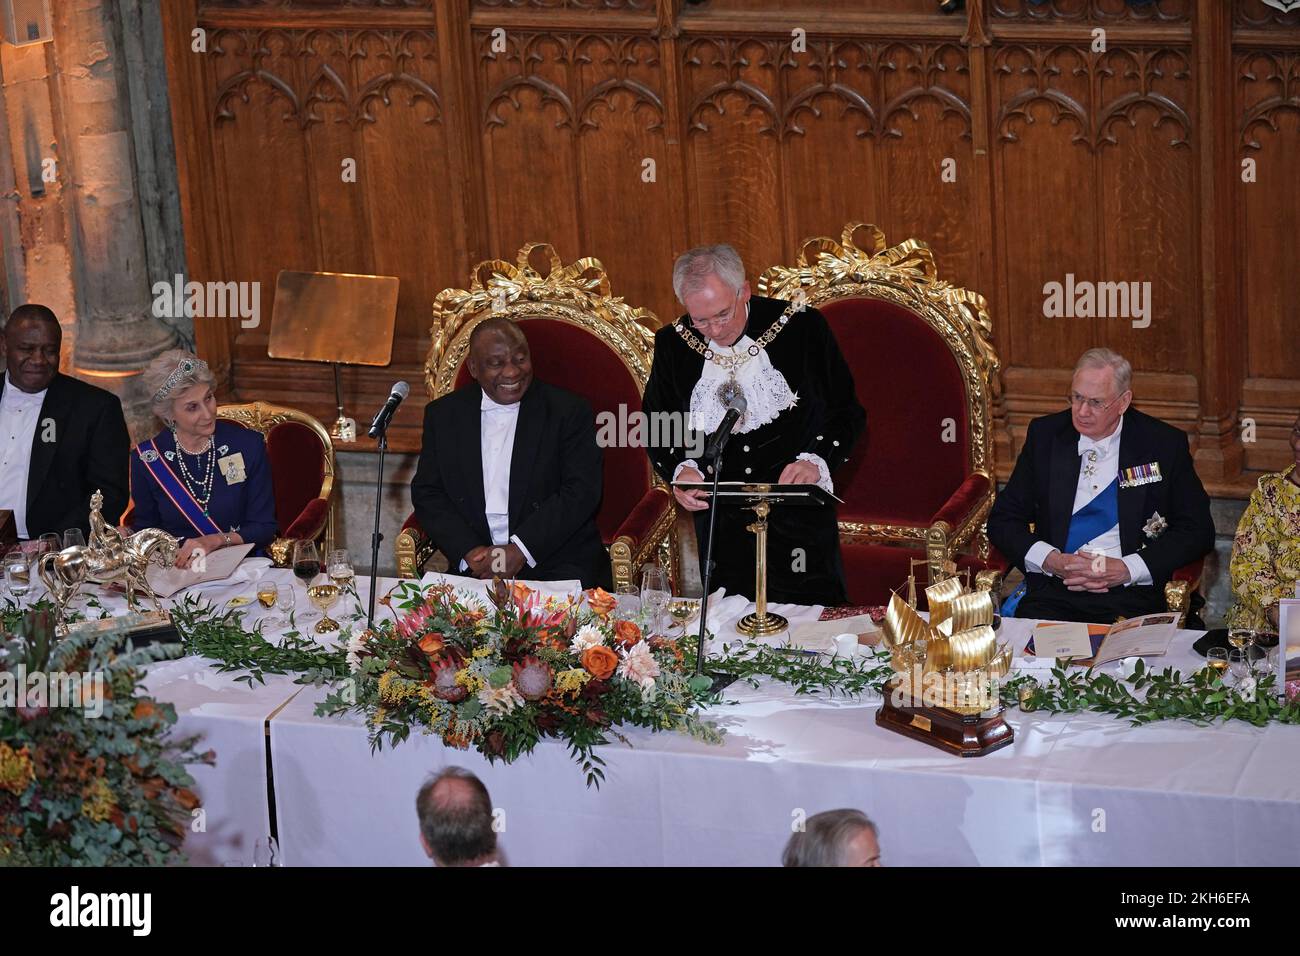 The Lord Mayor of London, Nicholas Lyons, speaks as President Cyril Ramaphosa (third left) of South Africa and the Duke (right) and Duchess of Gloucester (second left) listen, during a banquet at the Guildhall in London, given by the Lord Mayor and City of London Corporation, during his state visit to the UK. Picture date: Wednesday November 23, 2022. Stock Photo